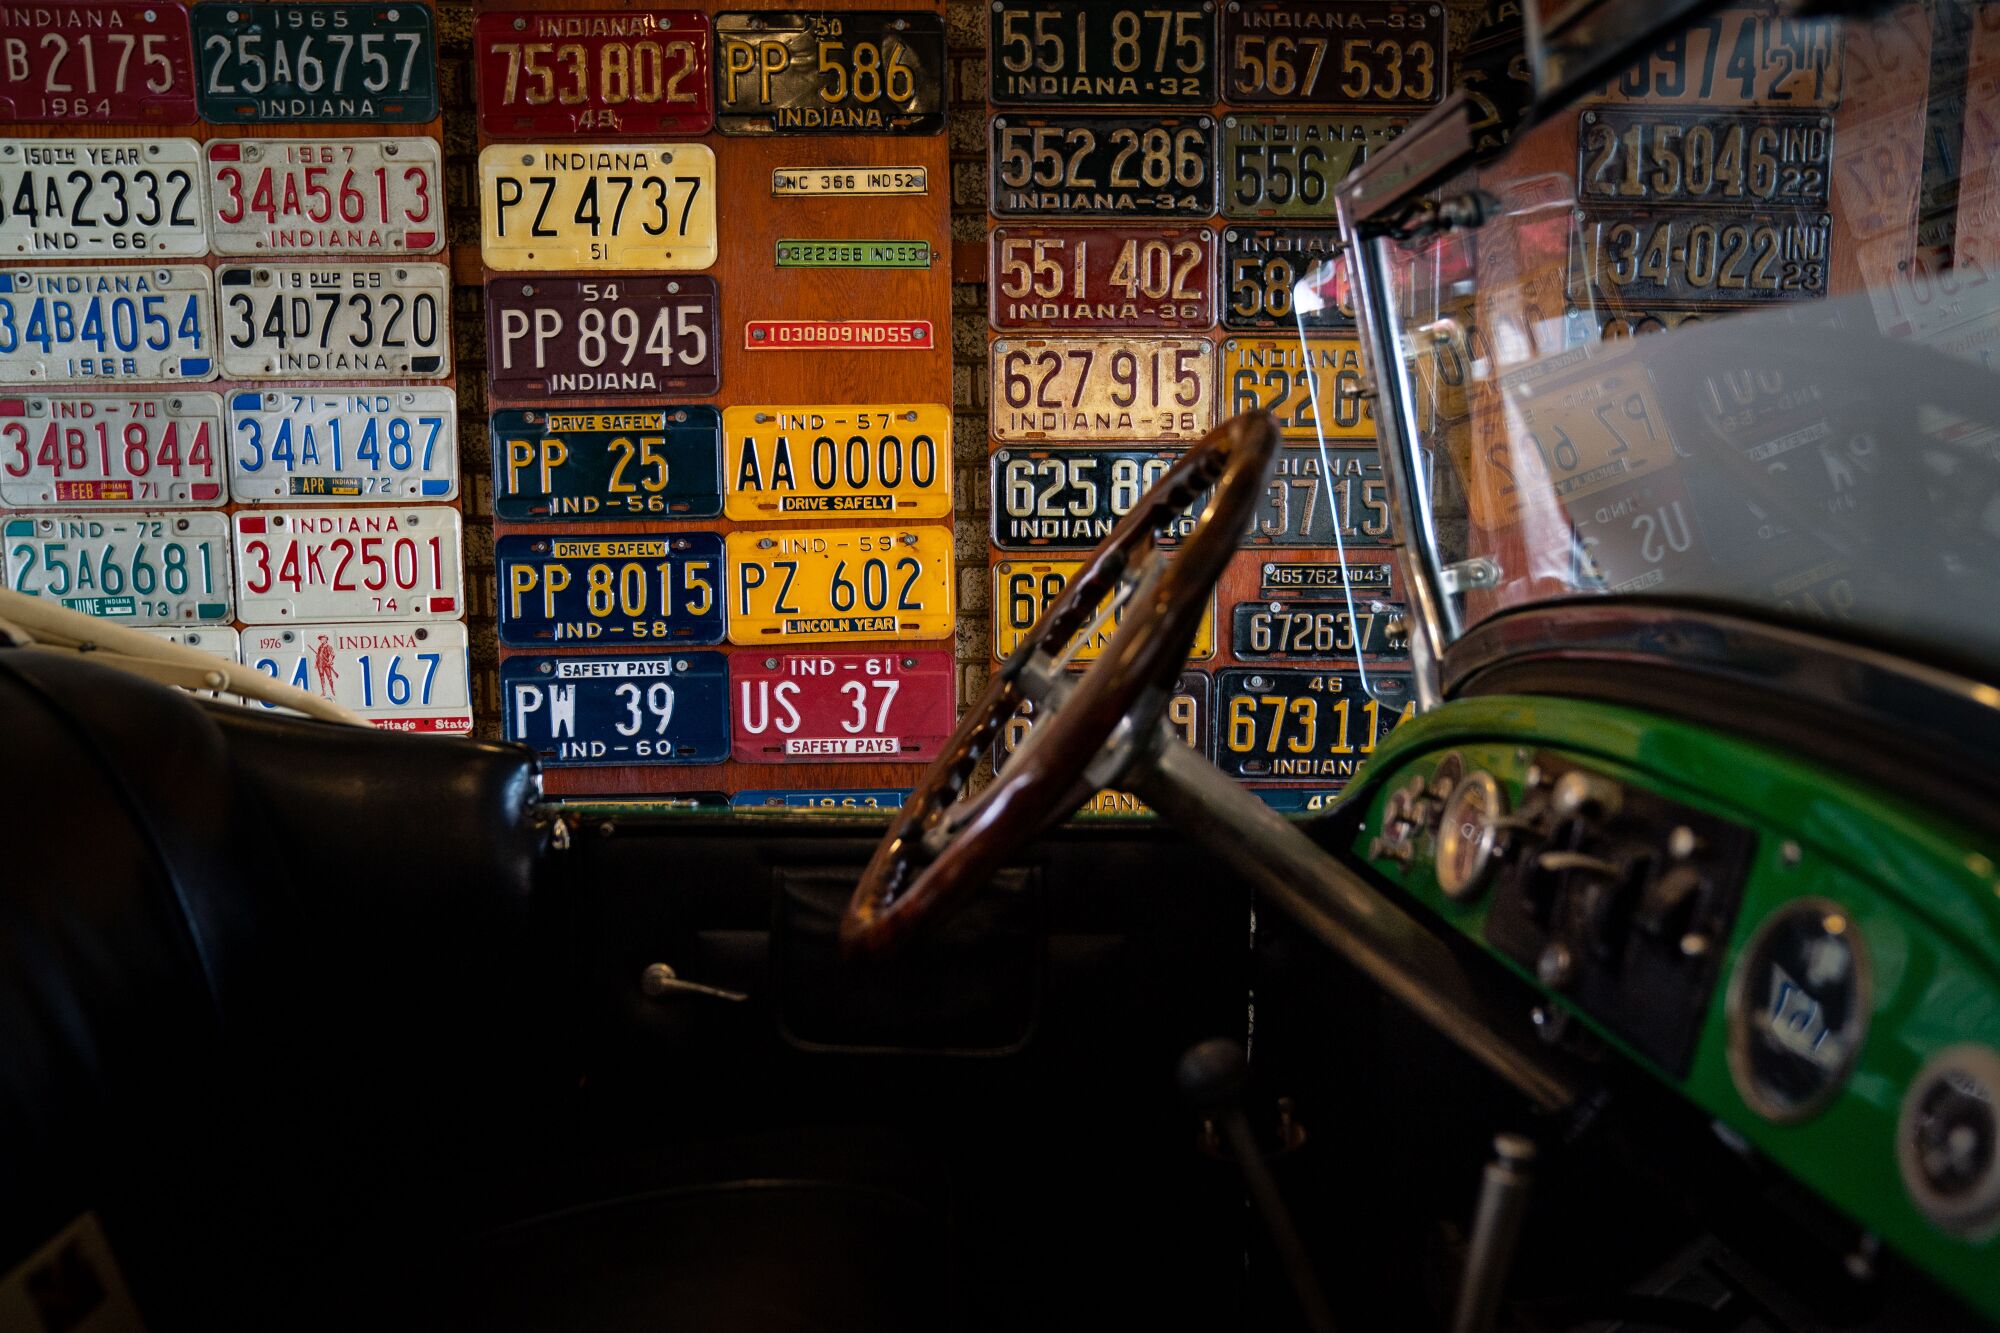 The interior of a vehicle, seen from the side, with a wall of license plates in various colors as the backdrop